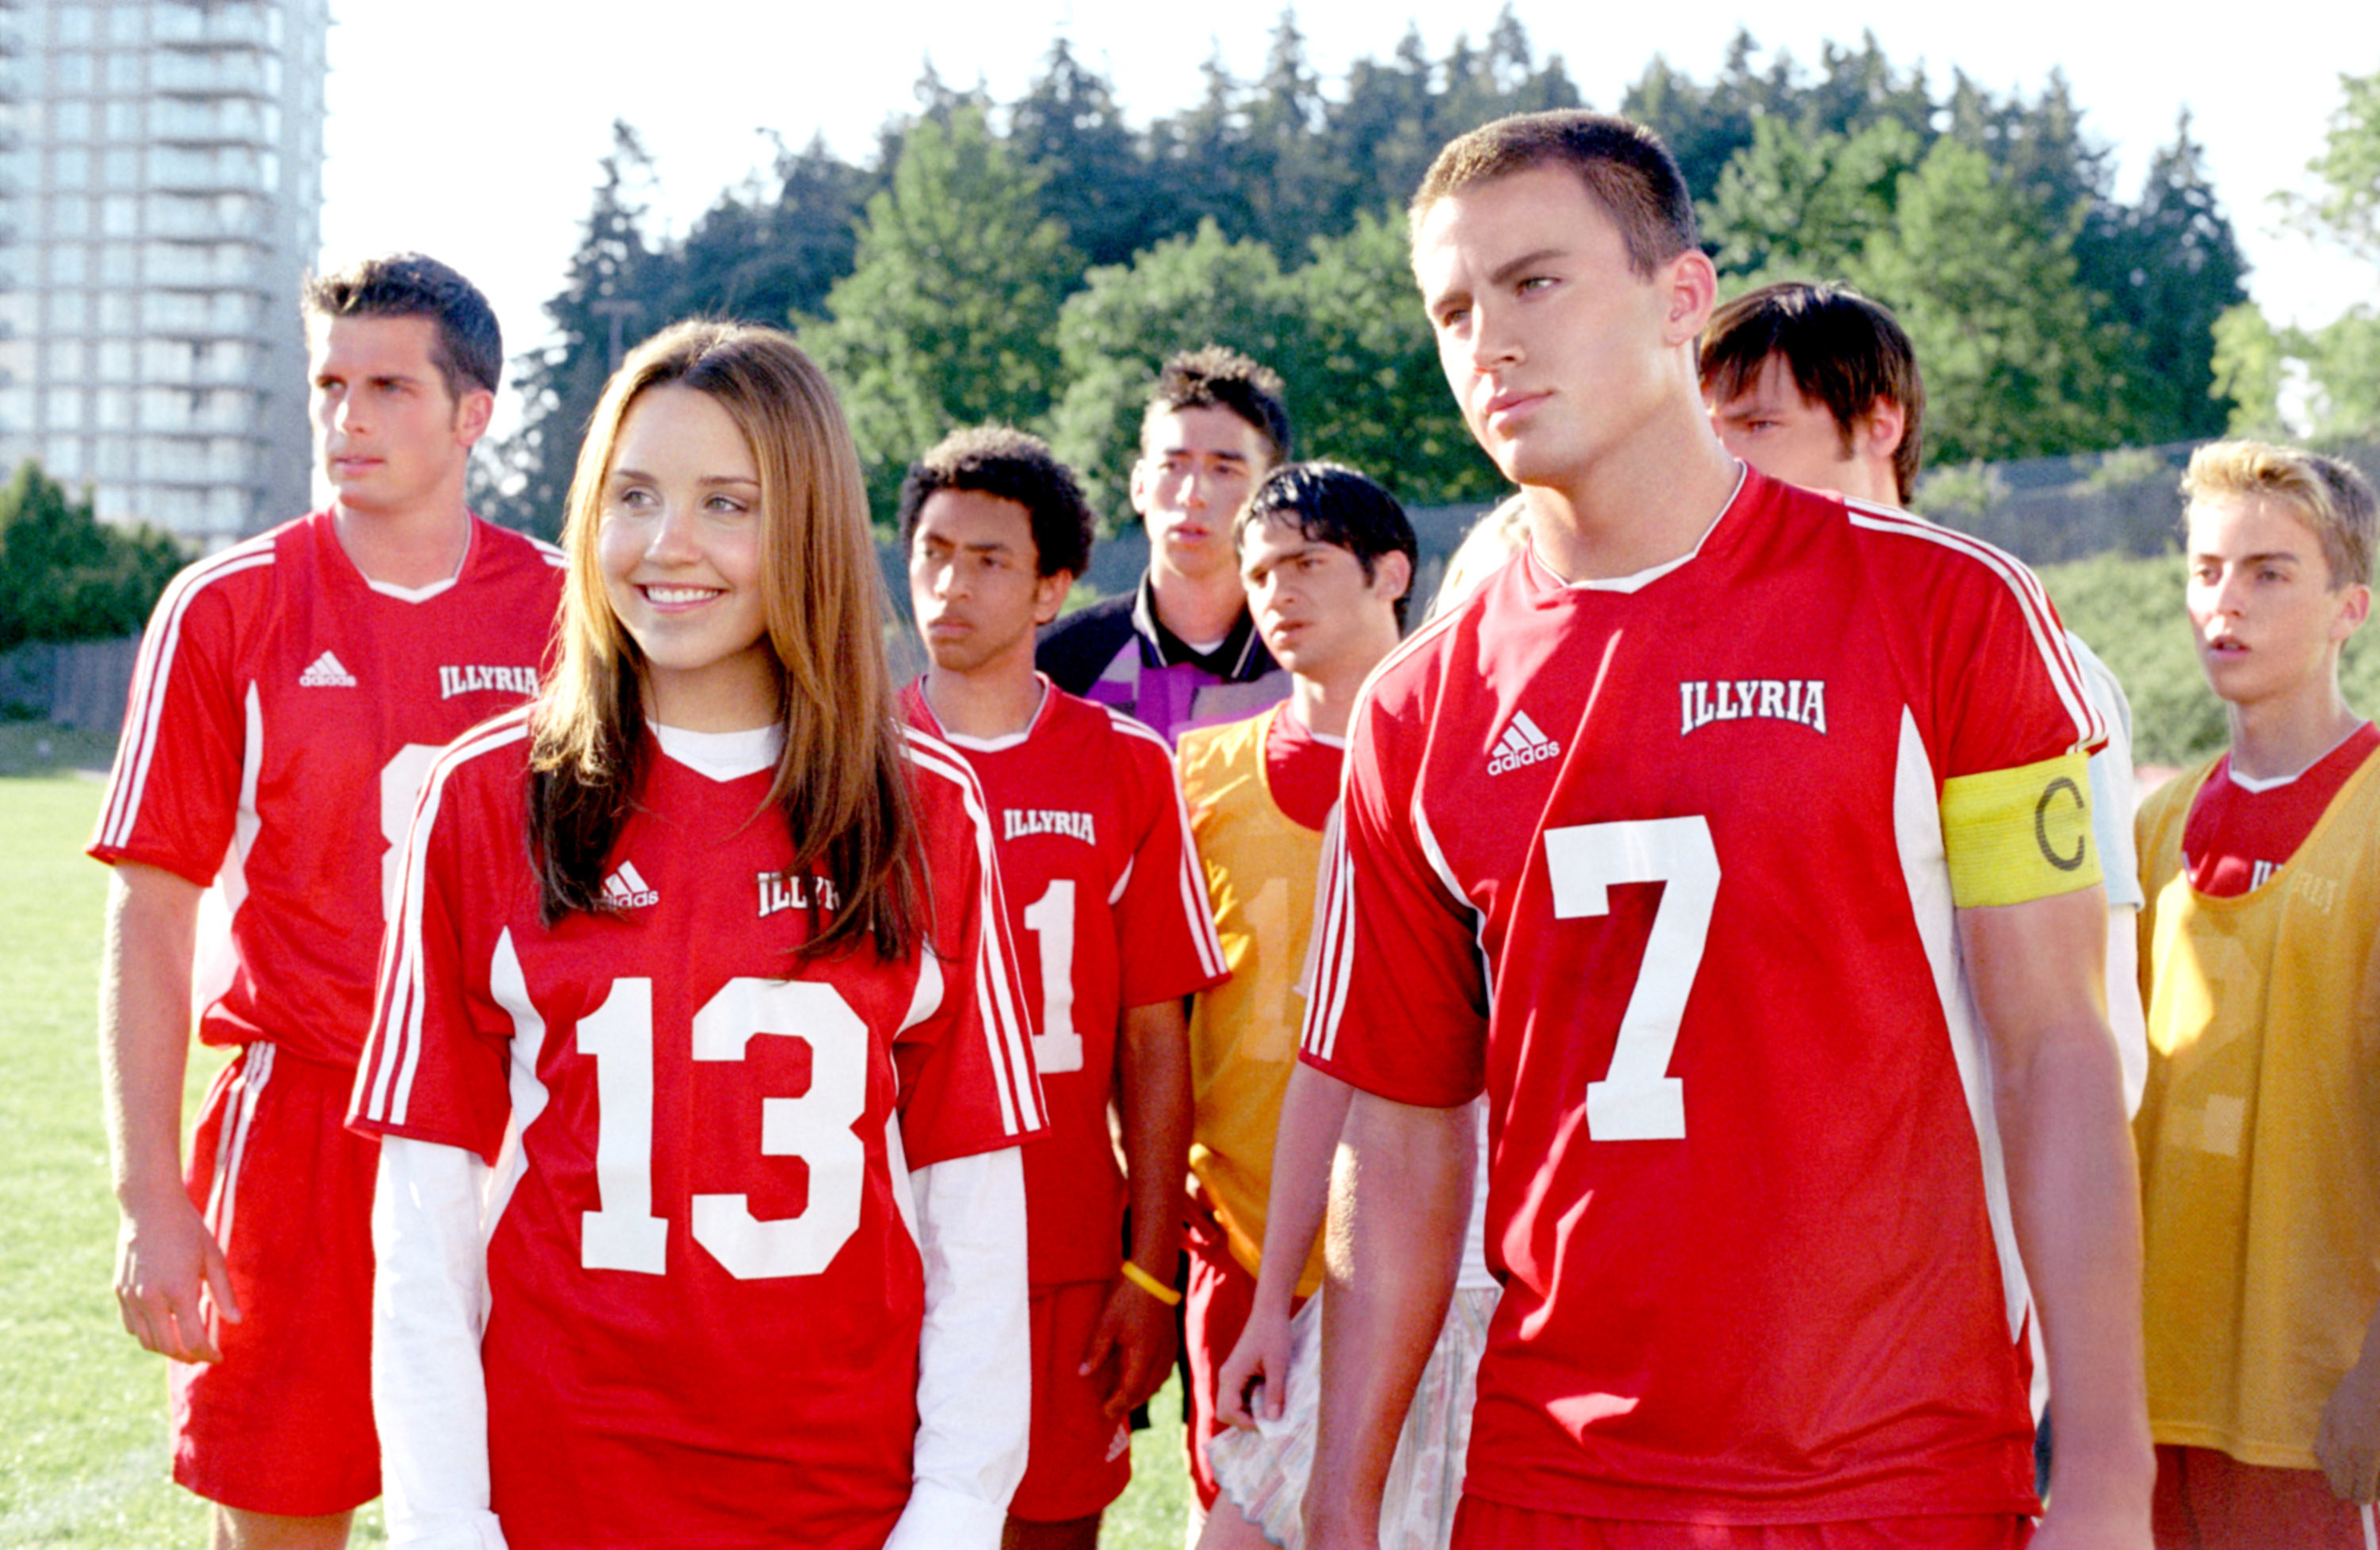 Amanda Bynes and Channing Tatum on the soccer field in a scene from the movie